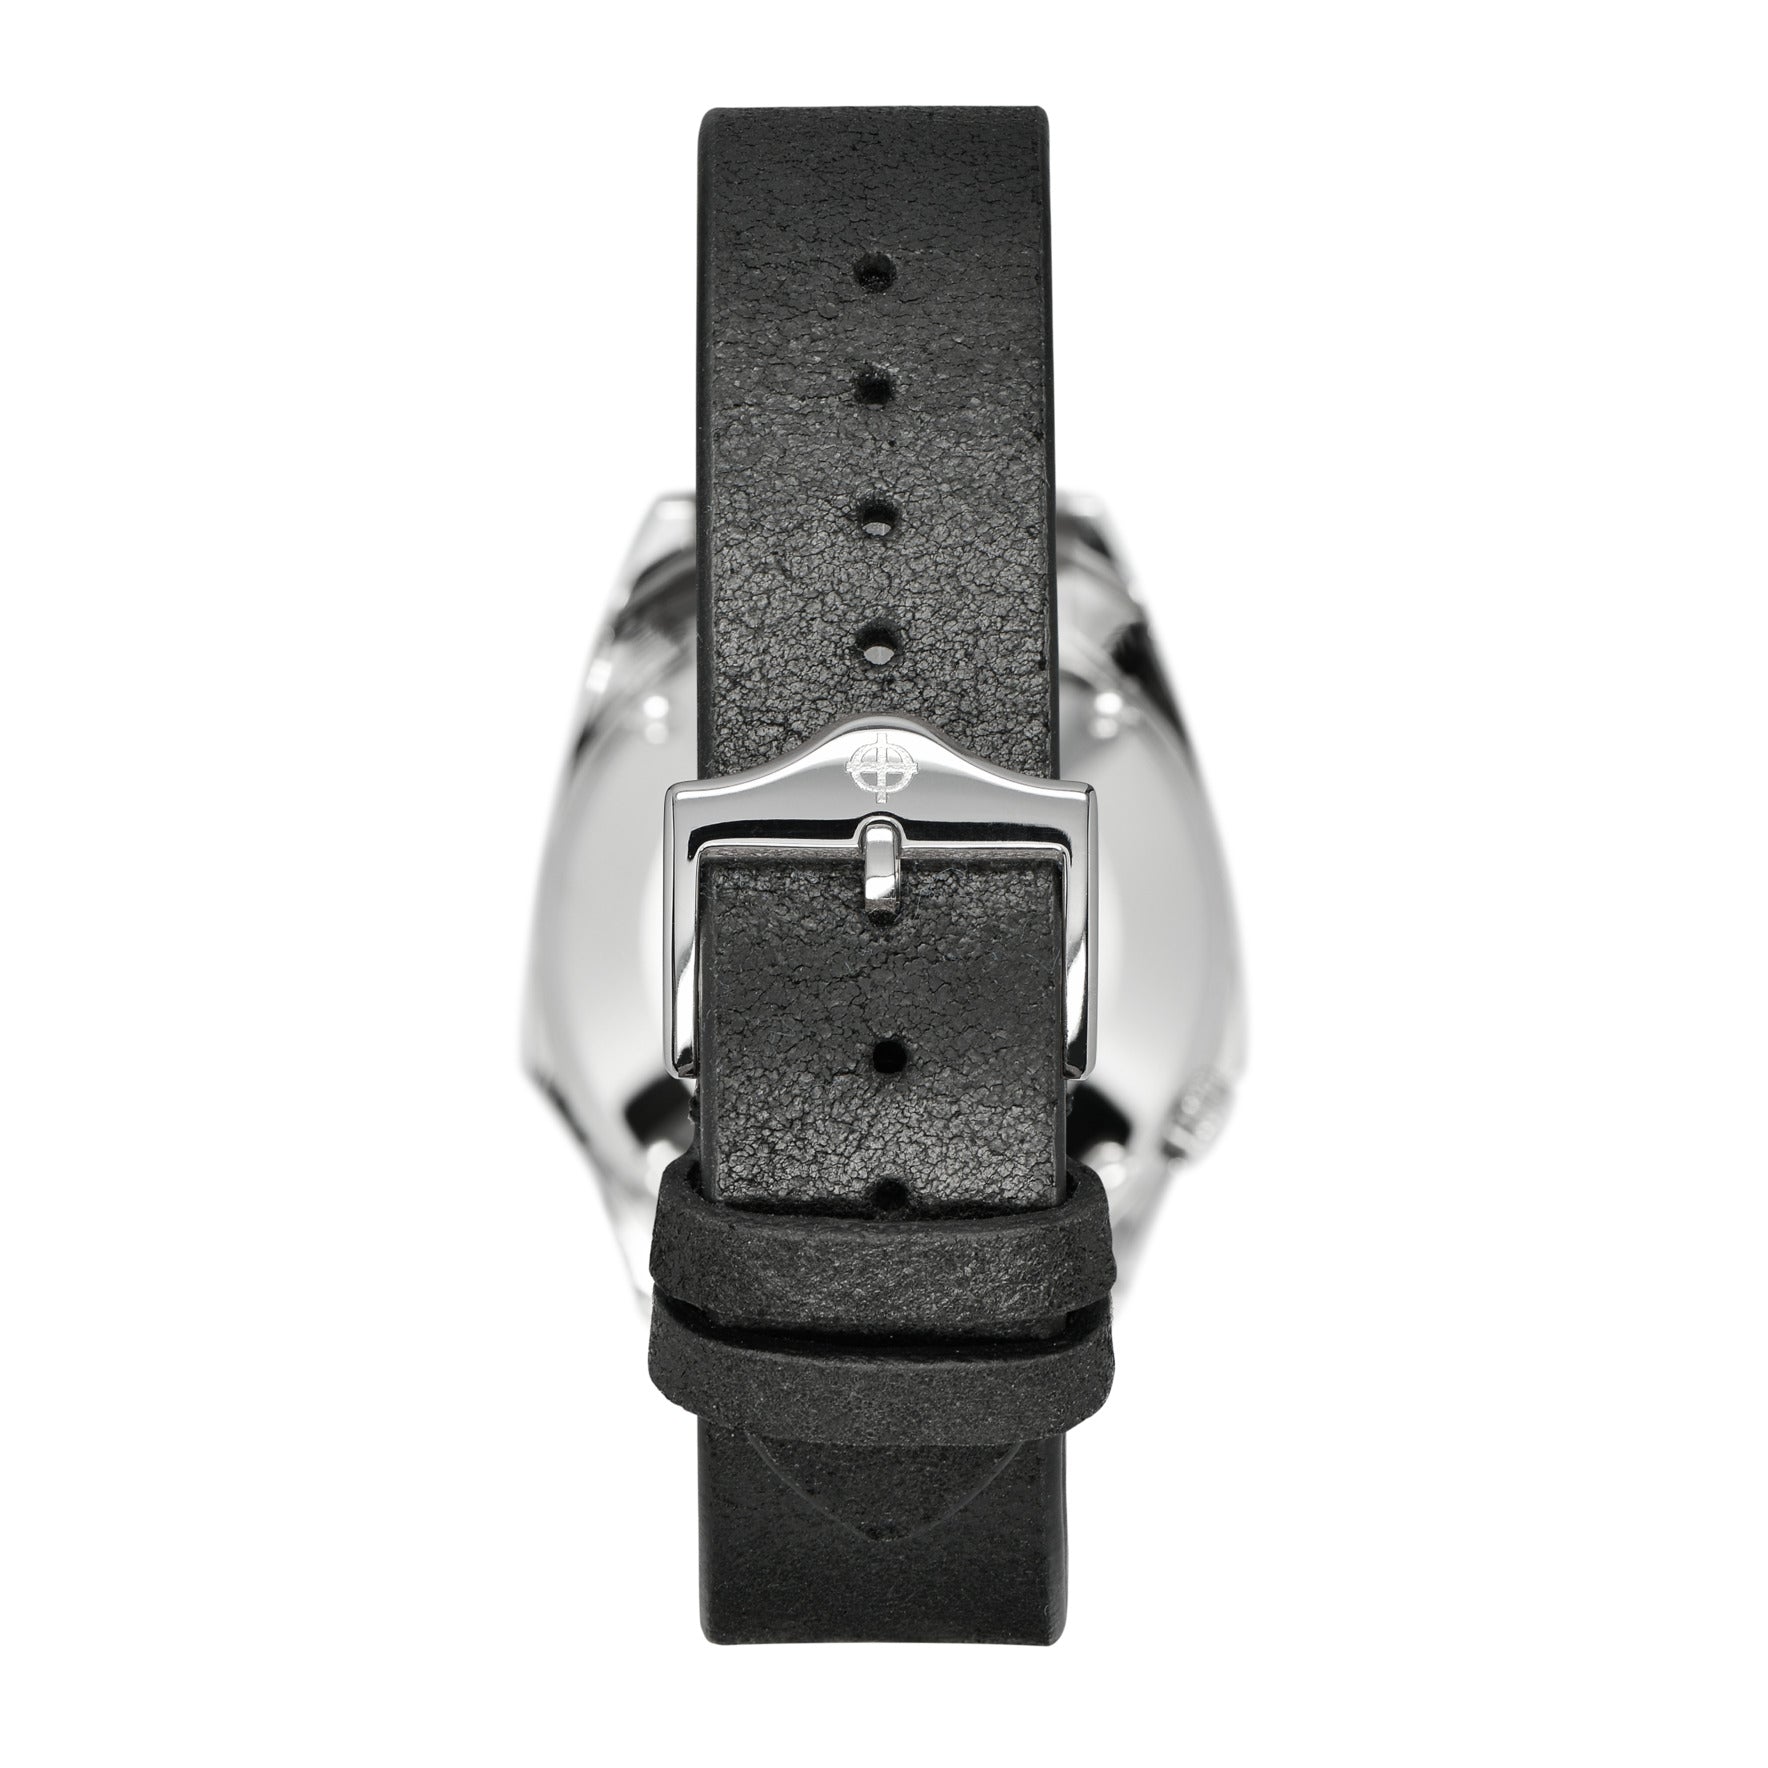 DRESS OLYMPOS AUTOMATIC LEATHER WATCH